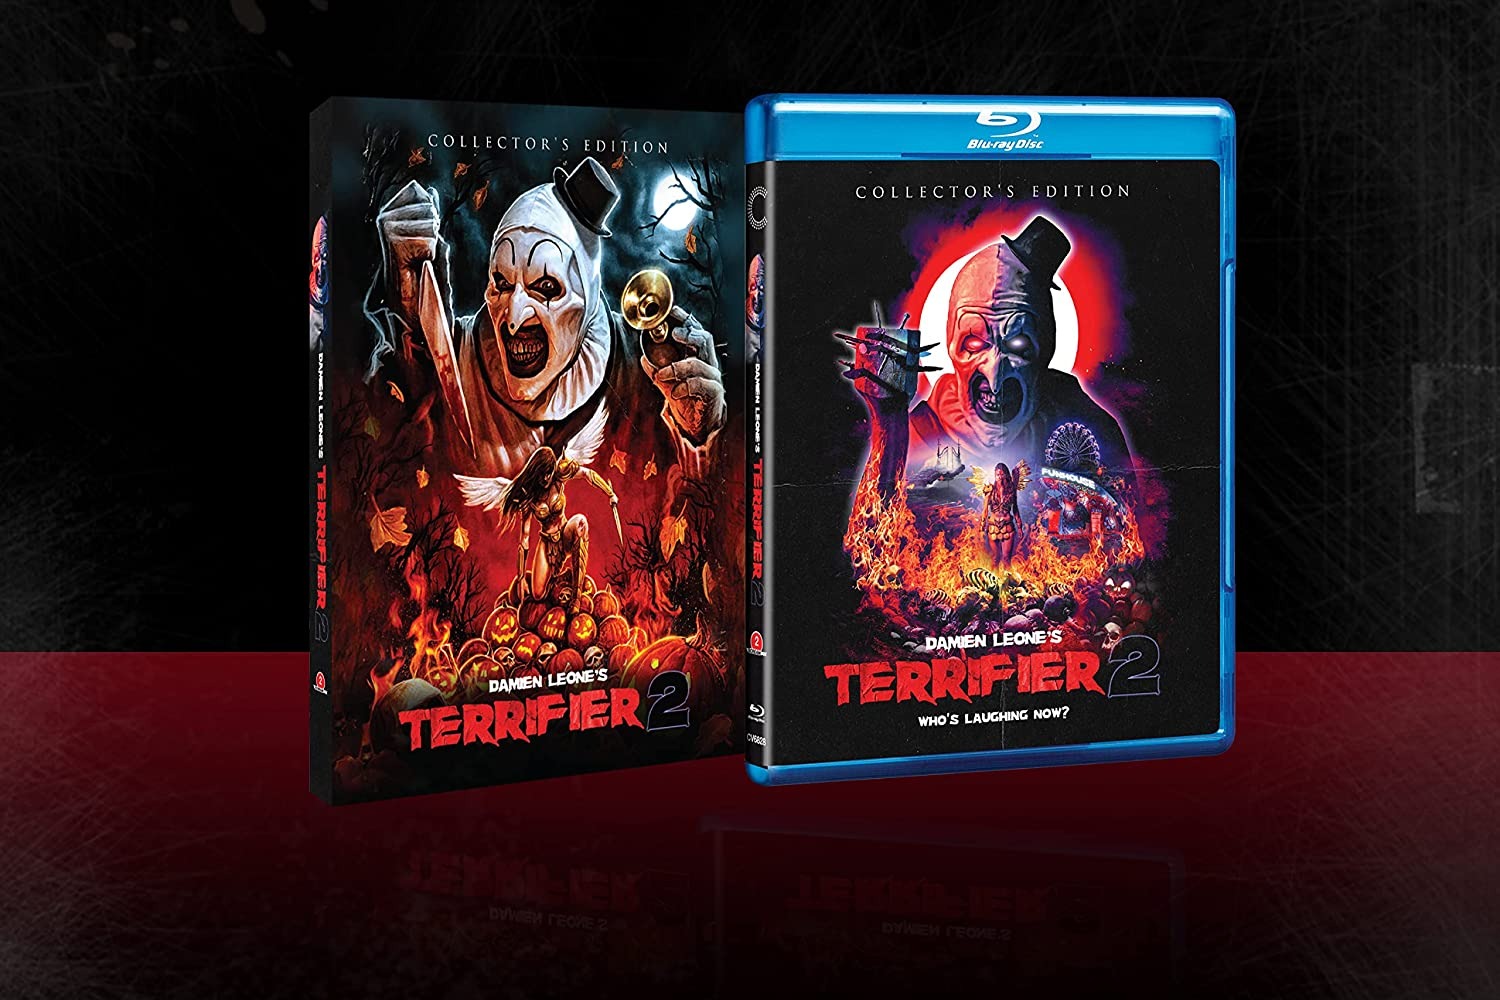 'Terrifier 2' Pre-Order Links for DVD, Collector's Edition Blu-ray, and Steelbook!